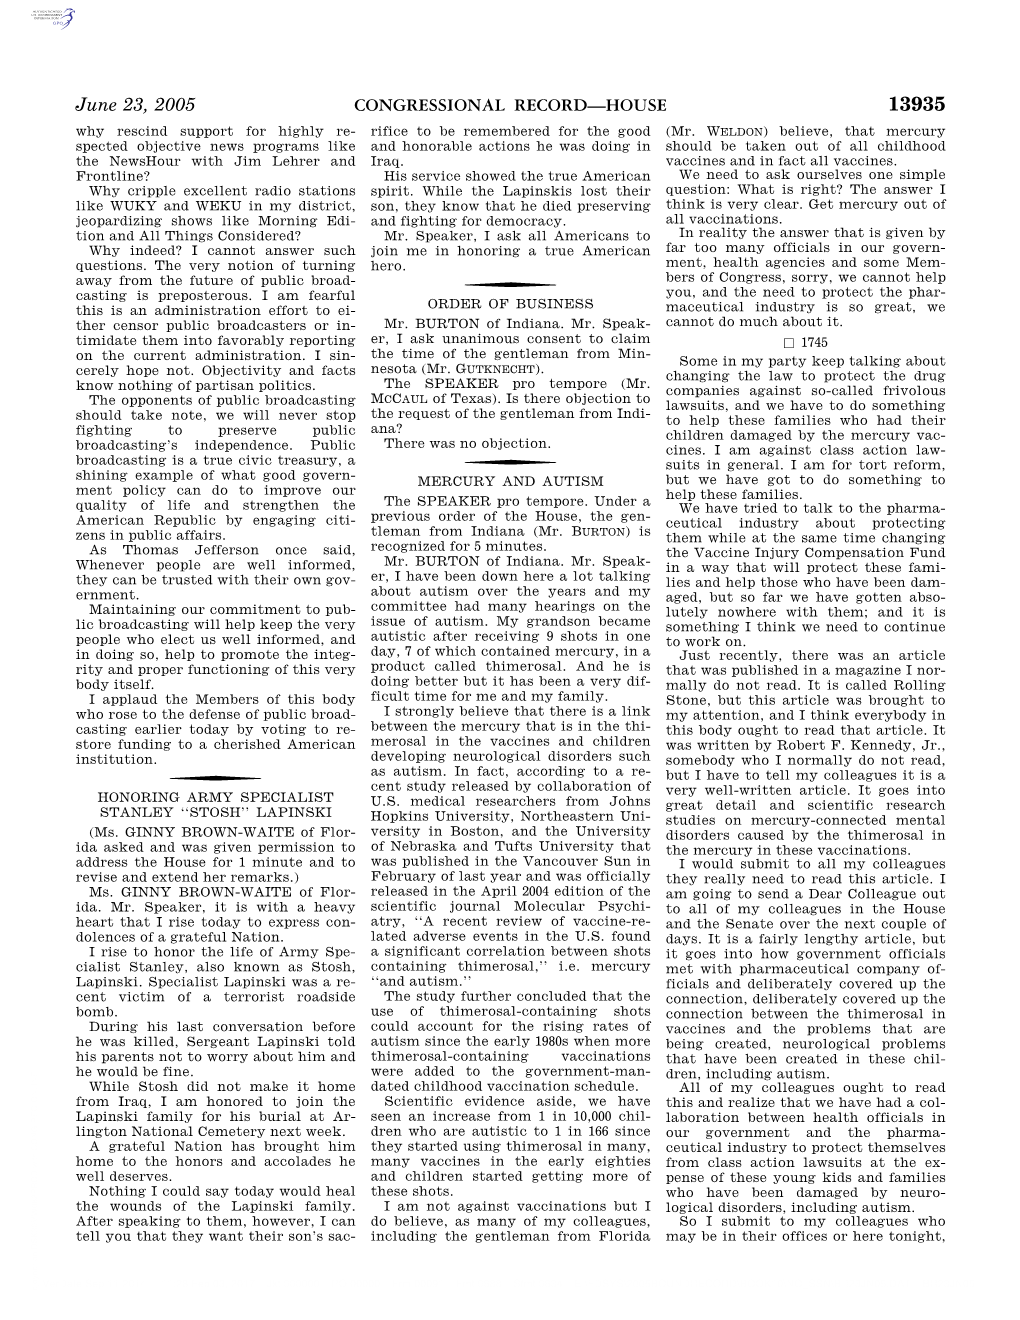 CONGRESSIONAL RECORD—HOUSE June 23, 2005 Please Read This Article